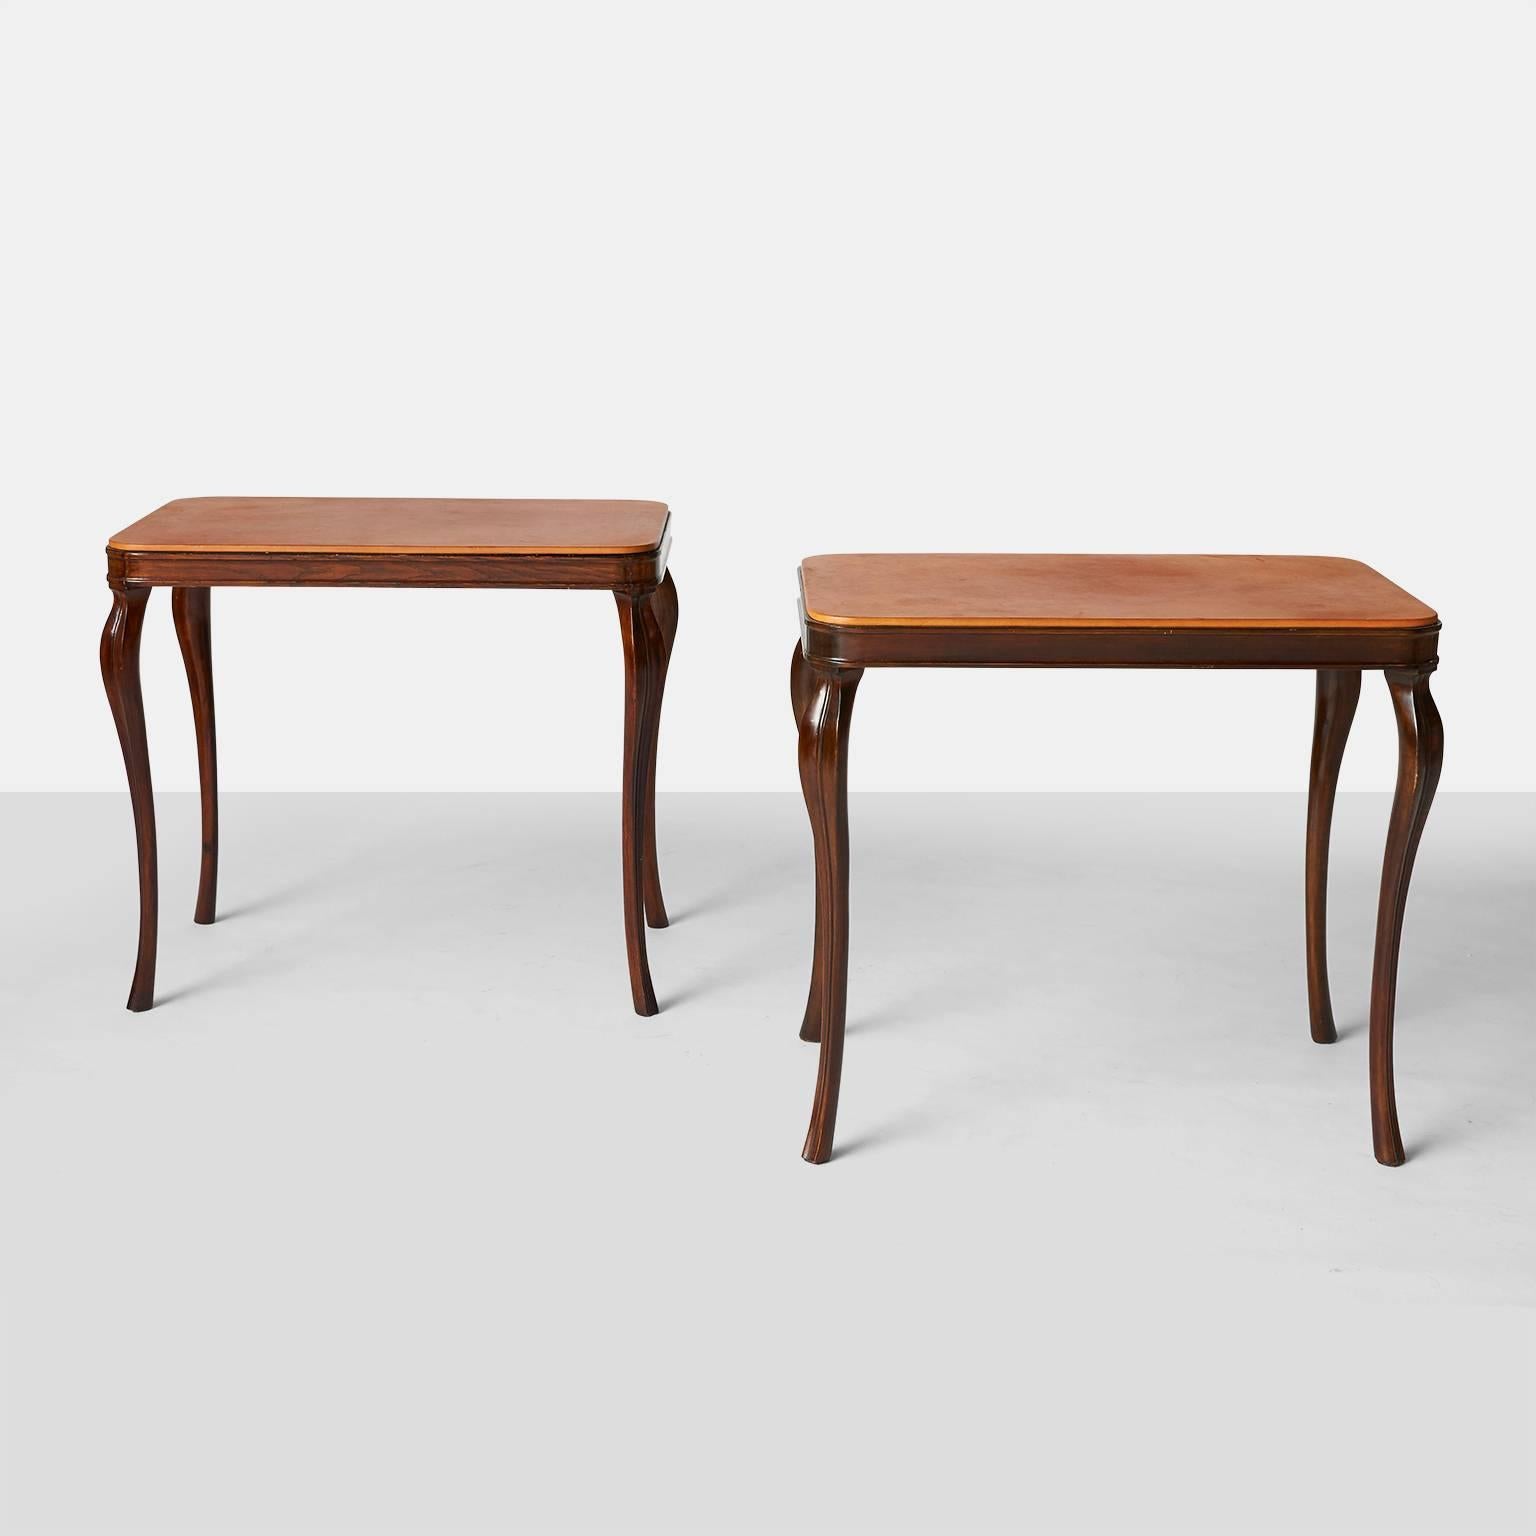 A pair of mahogany framed side tables with 